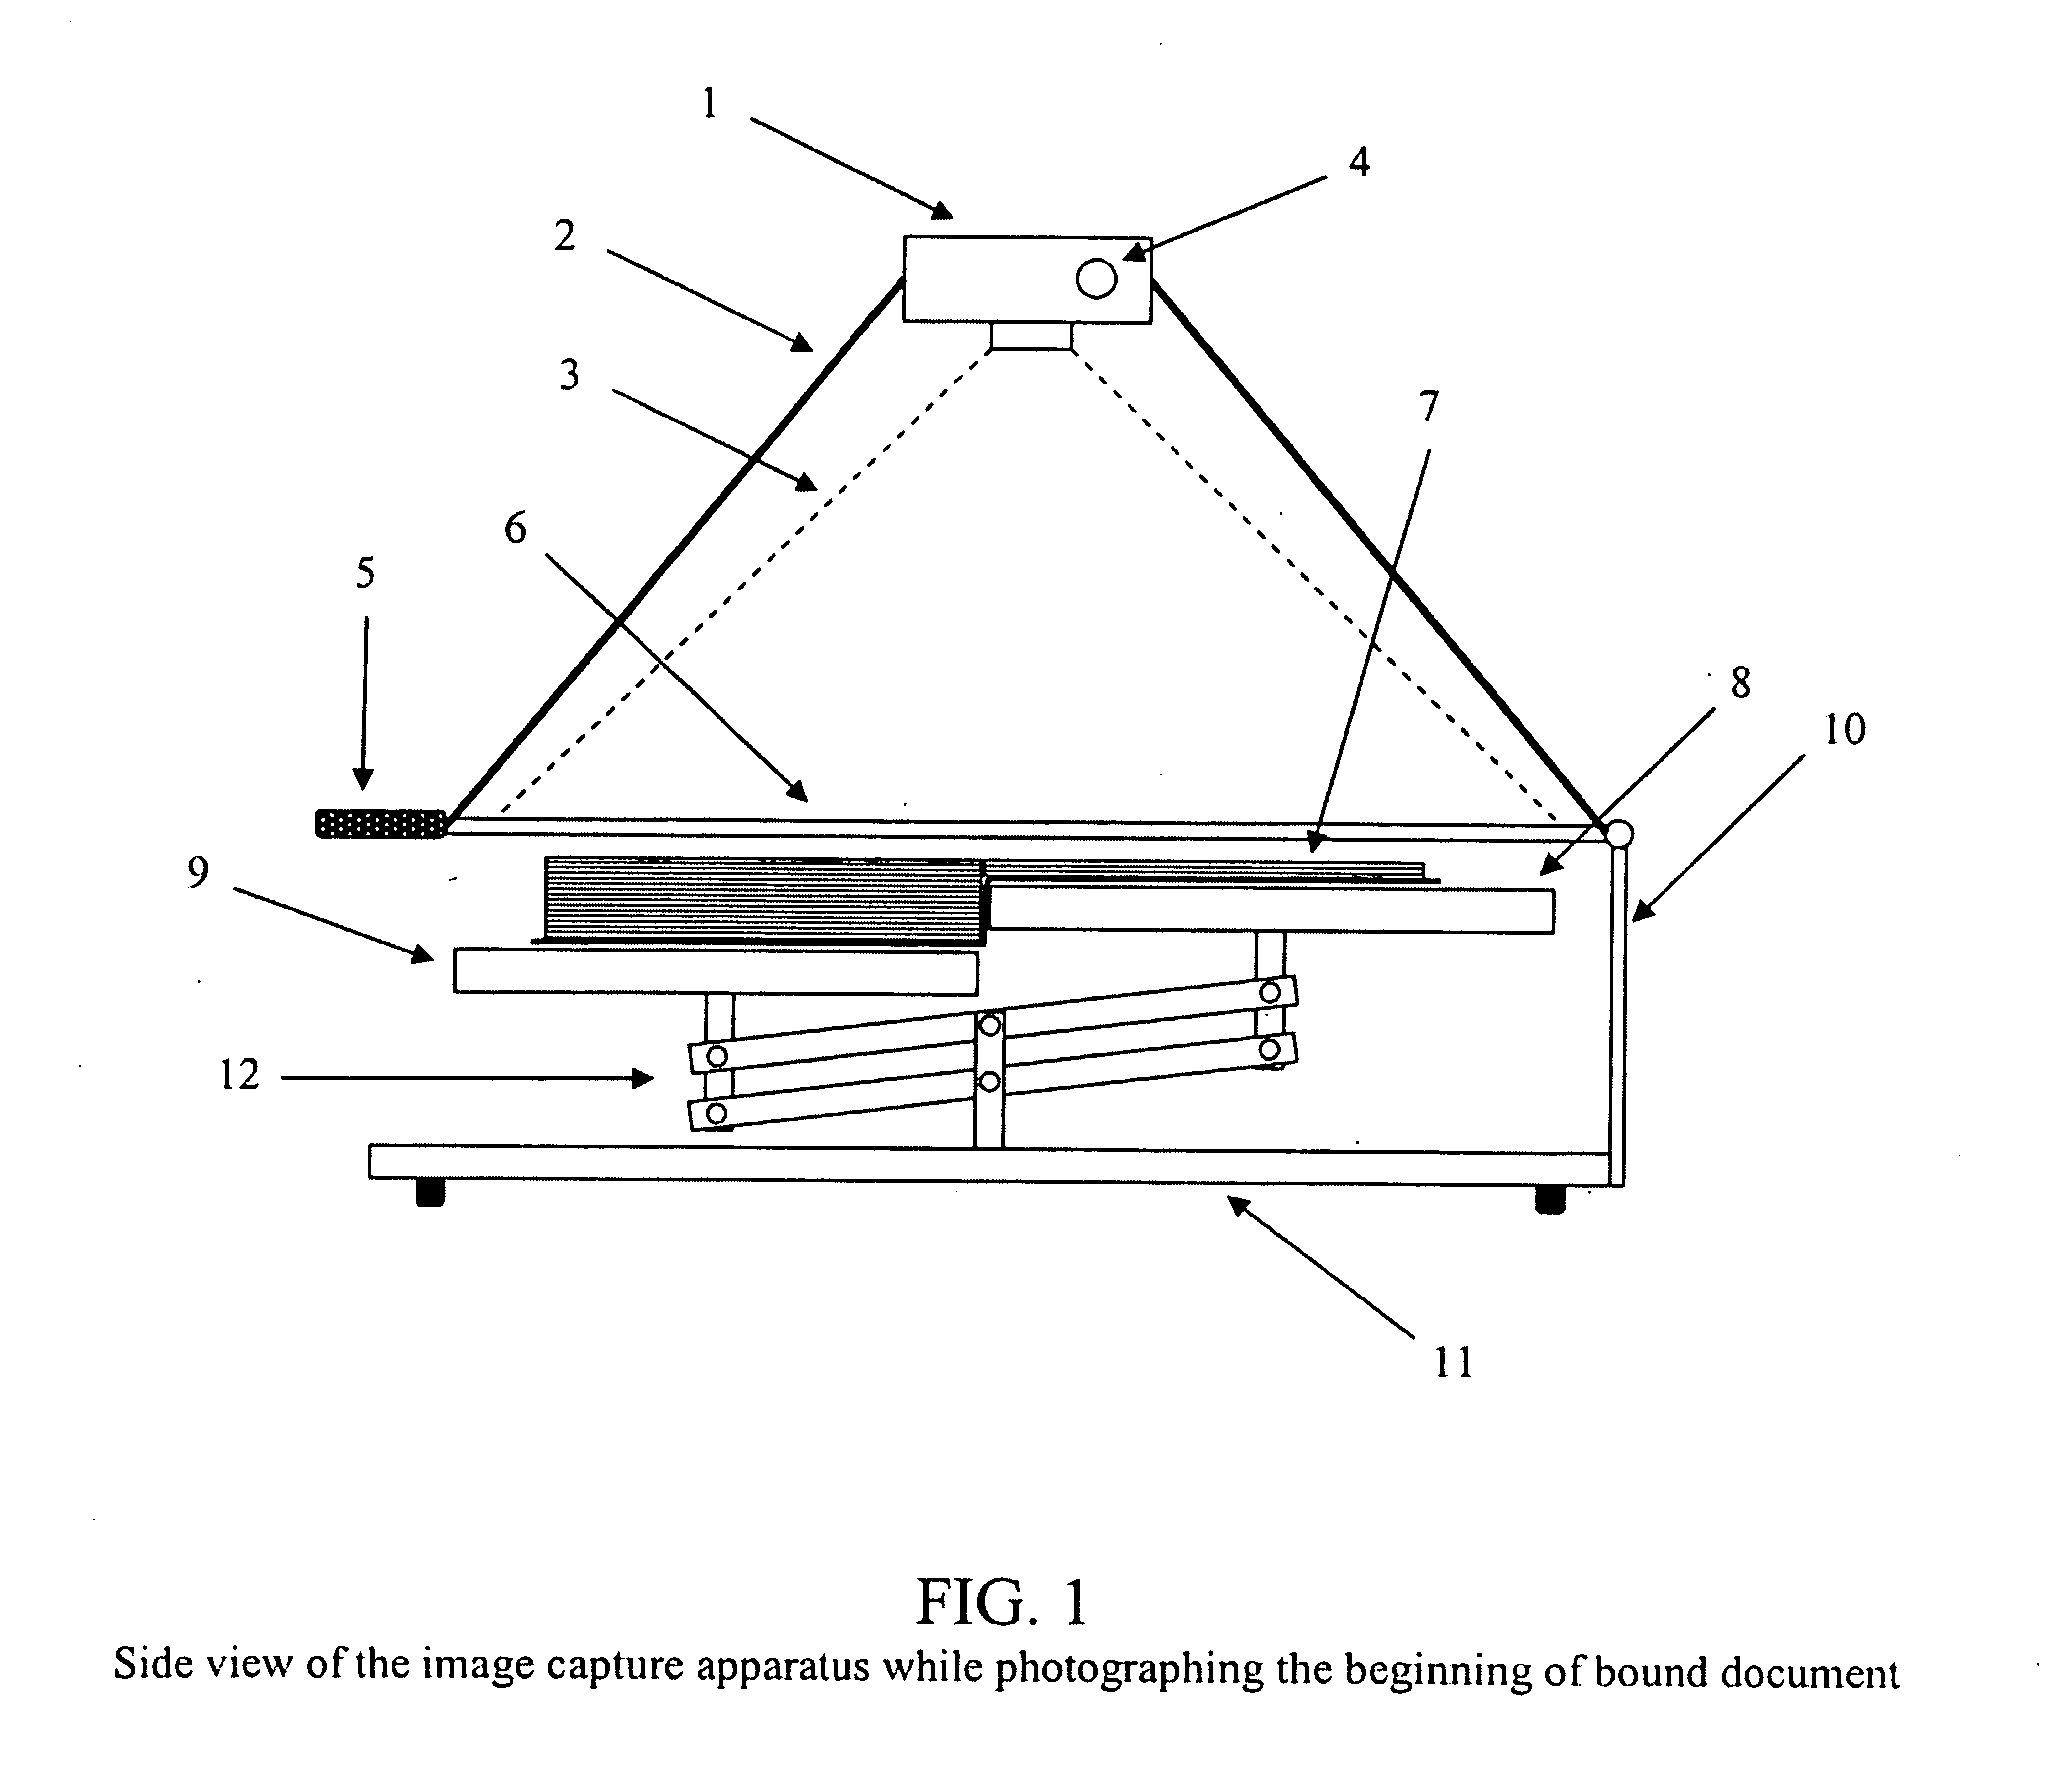 Method and apparatus for capturing the image of bound documents such as books using digital camera